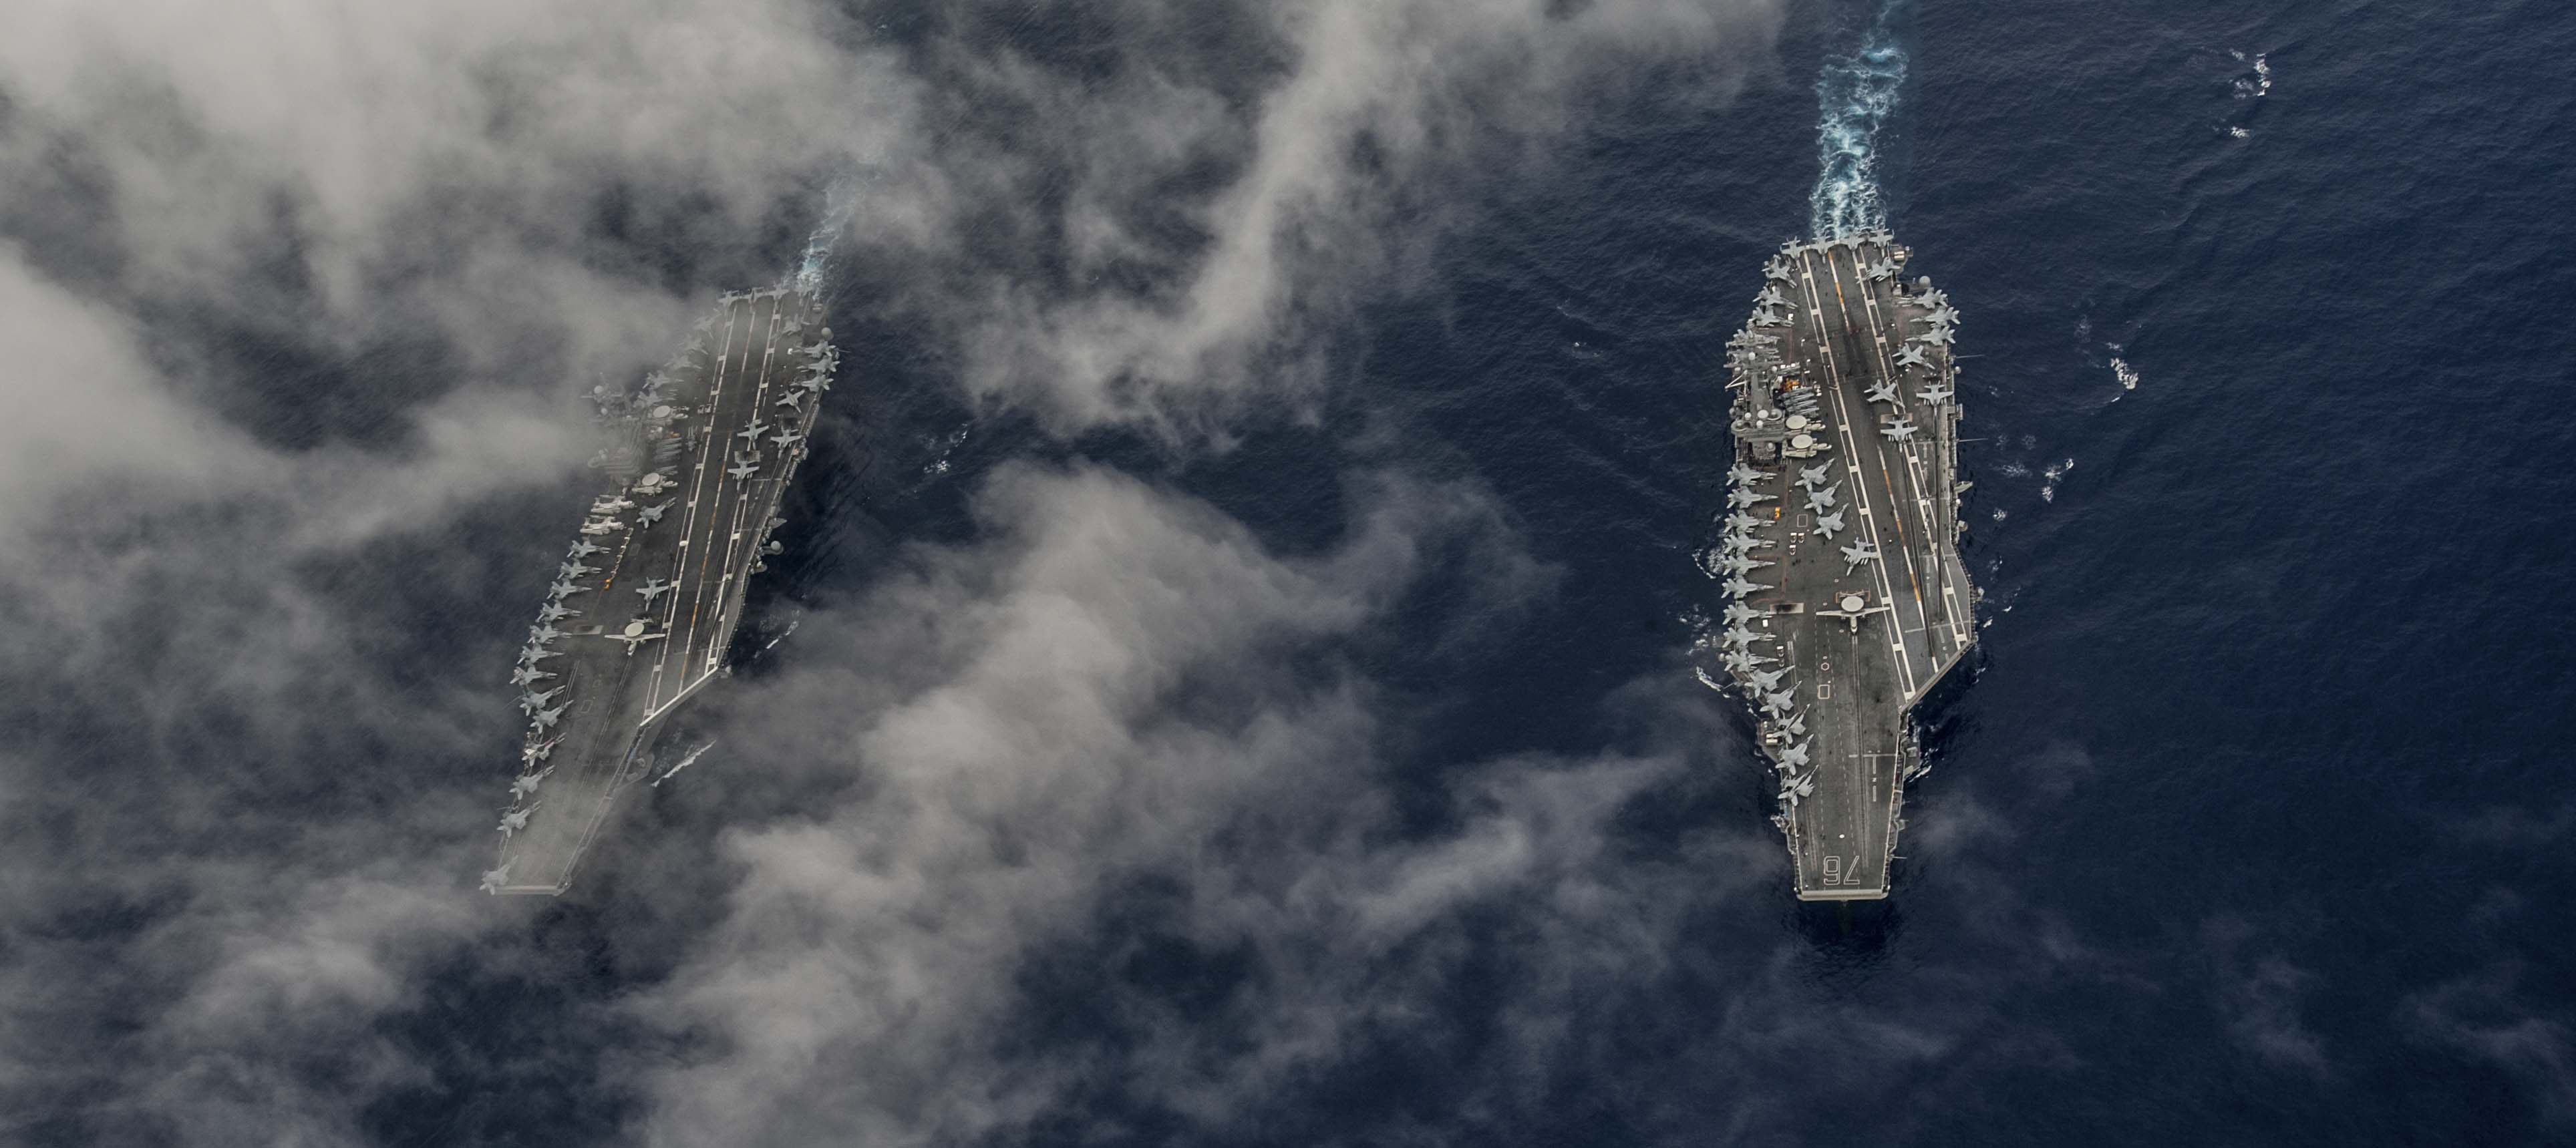 The Nimitz-class Aircraft carriers USS John C. Stennis (CVN 74) and USS Ronald Reagan (CVN 76) conduct dual aircraft carrier strike group operations in the U.S. 7th Fleet area of operations in support of security and stability in the Indo-Asia-Pacific. US Navy photo.